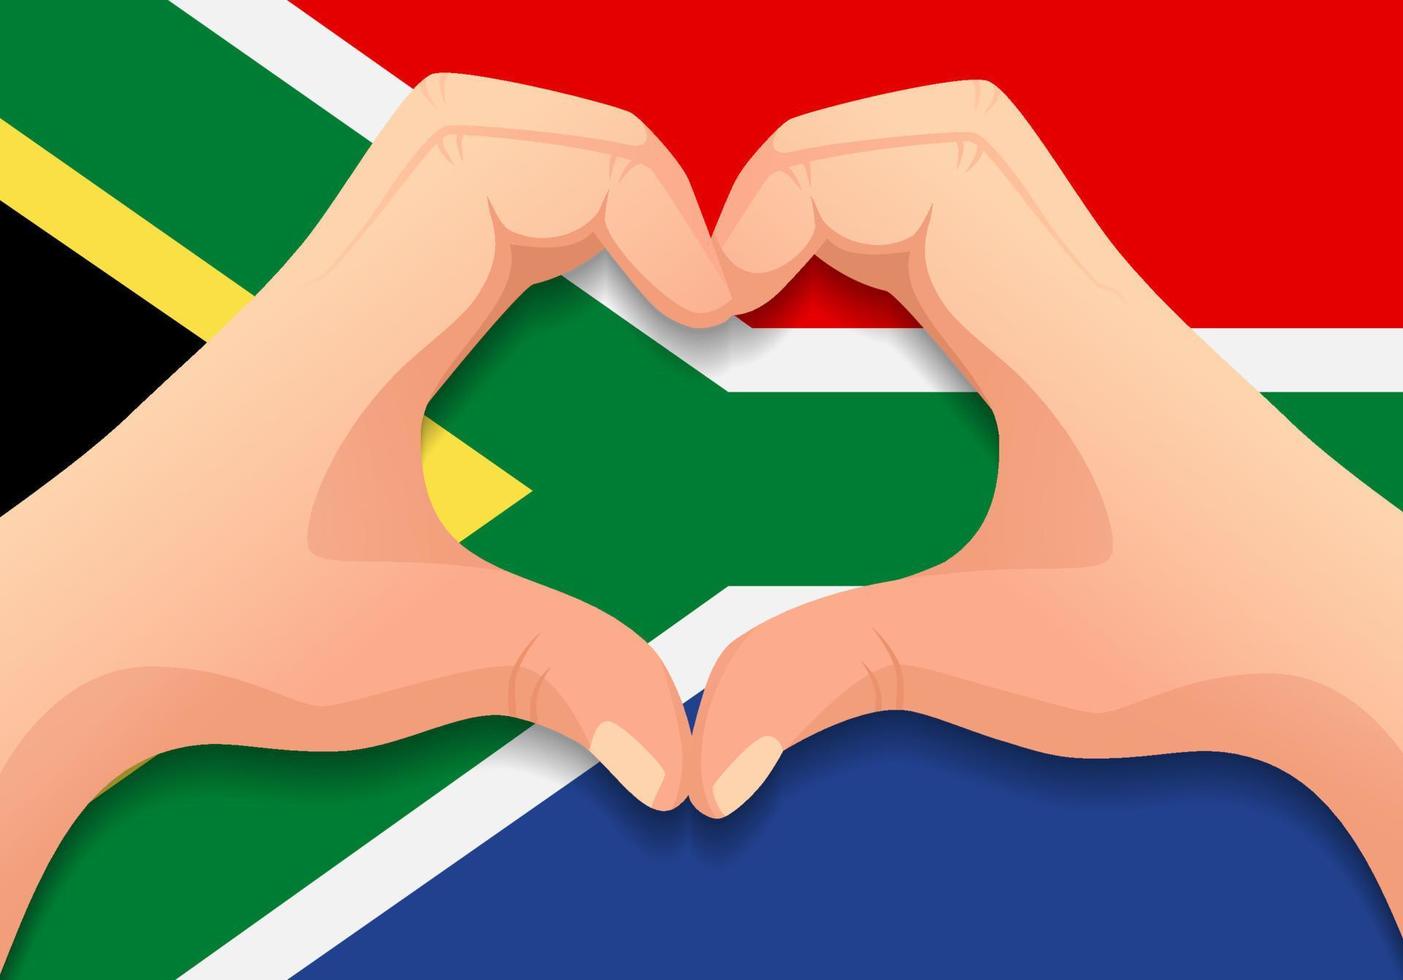 South Africa flag and hand heart shape vector